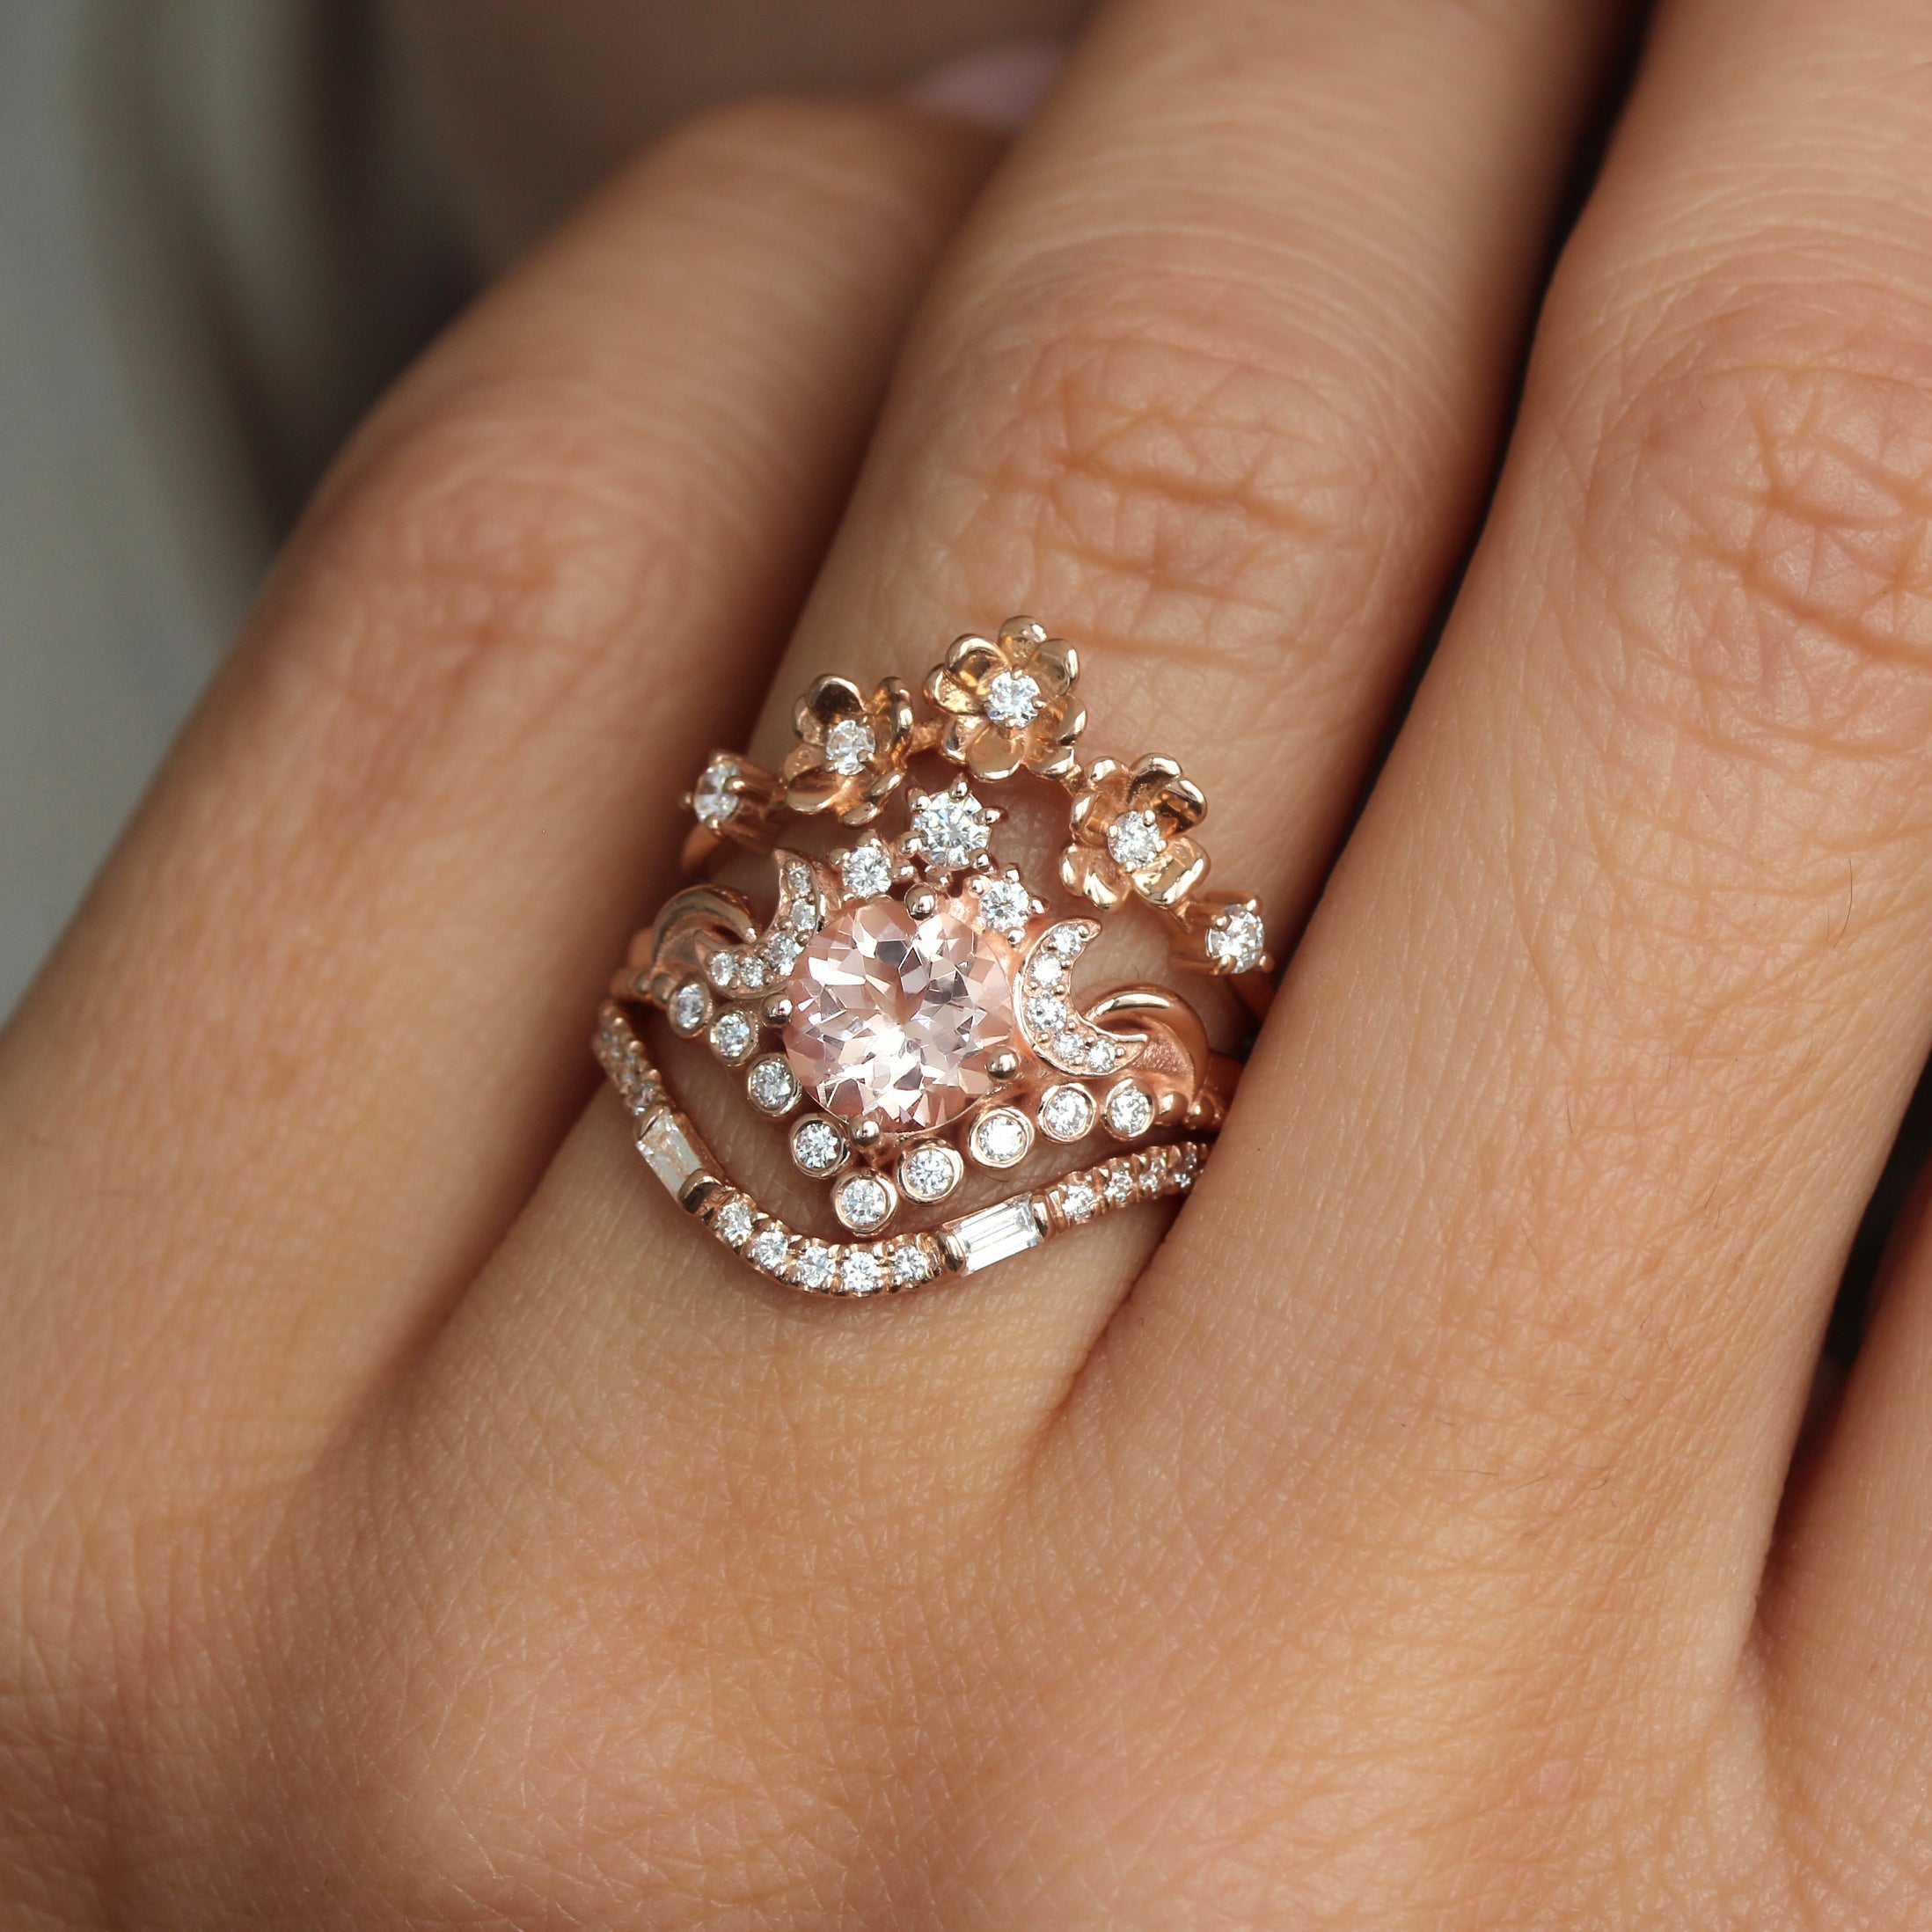 Round Morganite Moons and Stars Engagement Ring, 14K Rose Gold, "Moonlight" READY TO SHIP! ♥